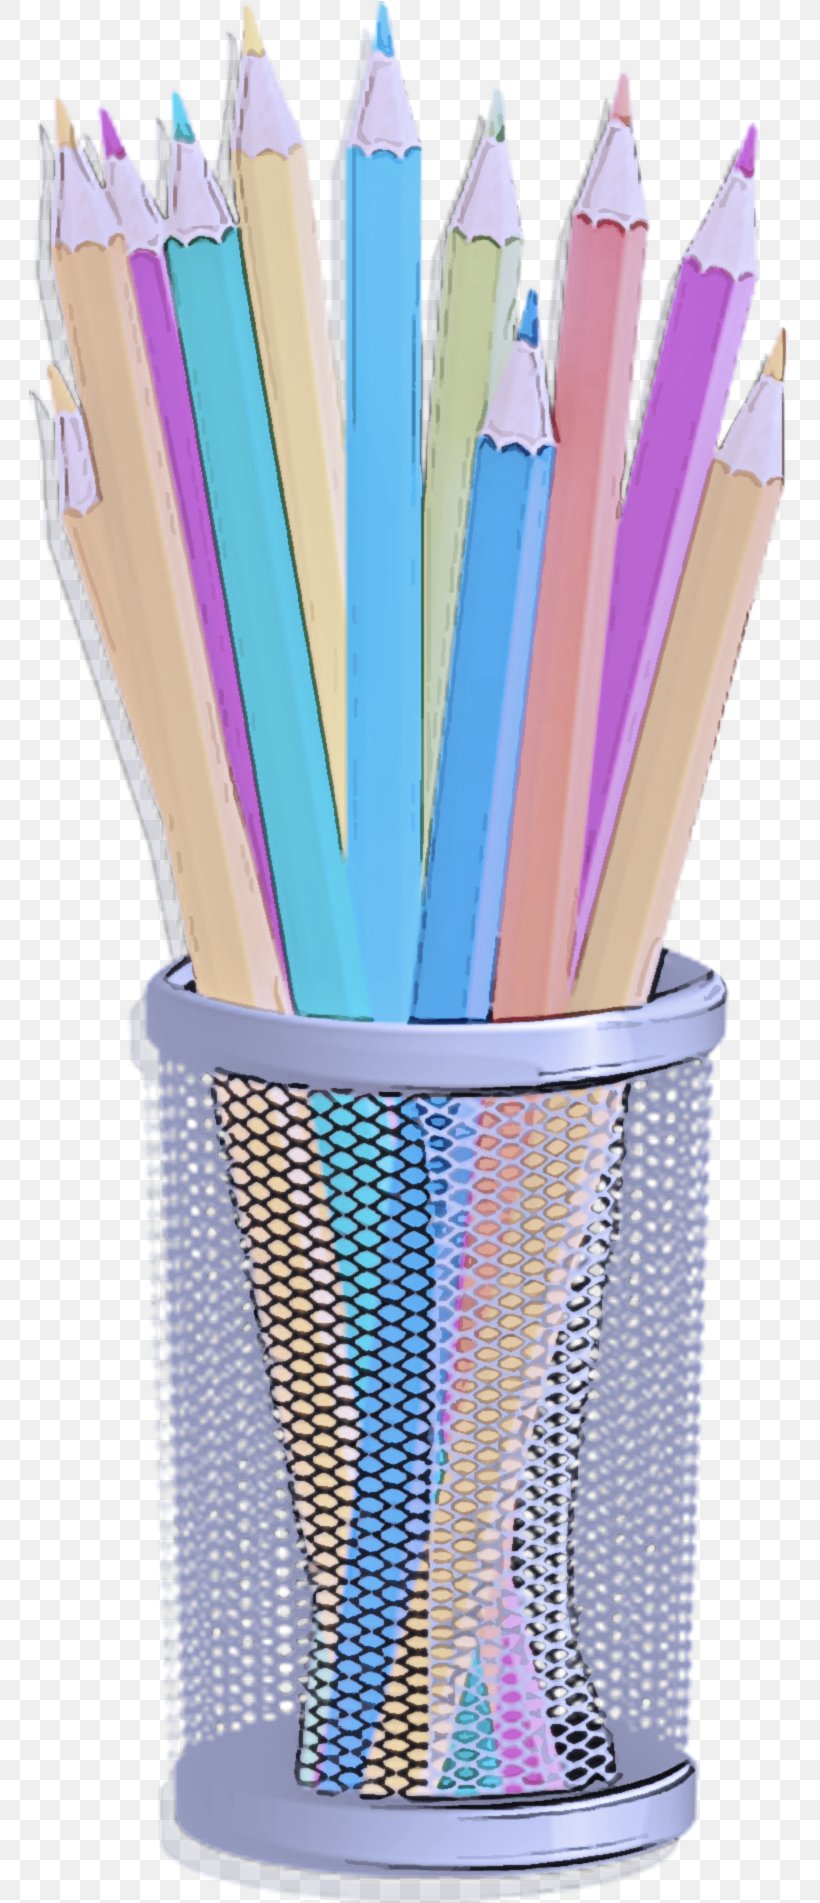 Straw Pencil Stationery Writing Implement Drinking Straw, PNG, 761x1903px, Straw, Drinking Straw, Pencil, Pencil Case, Stationery Download Free